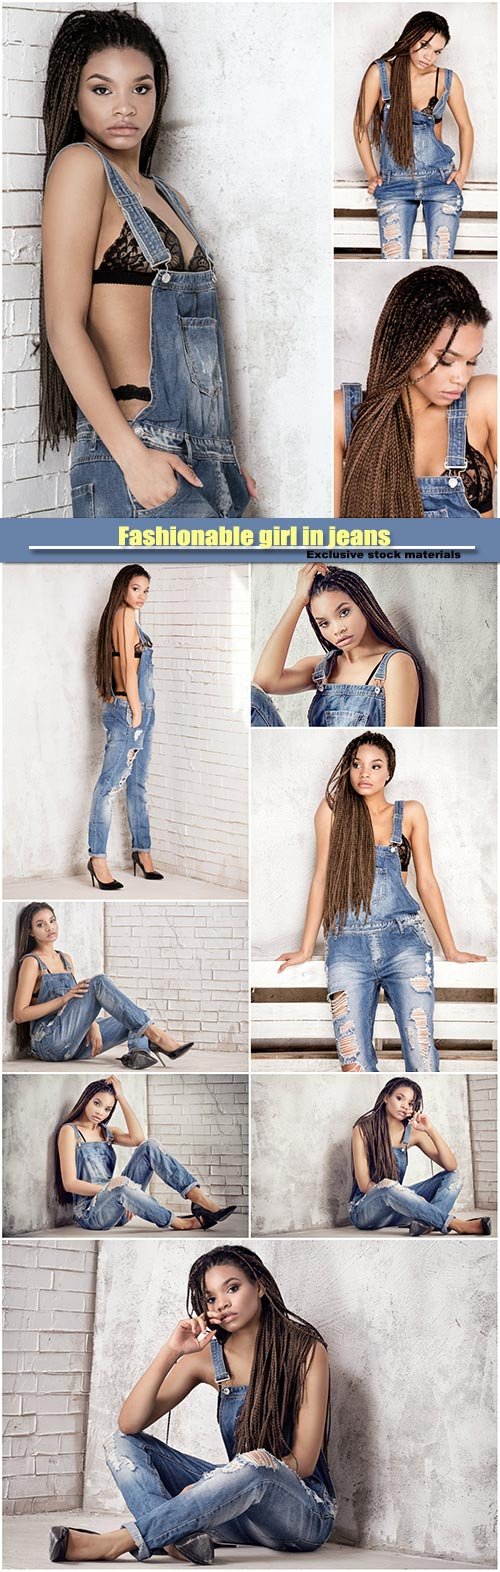 Fashionable girl in jeans